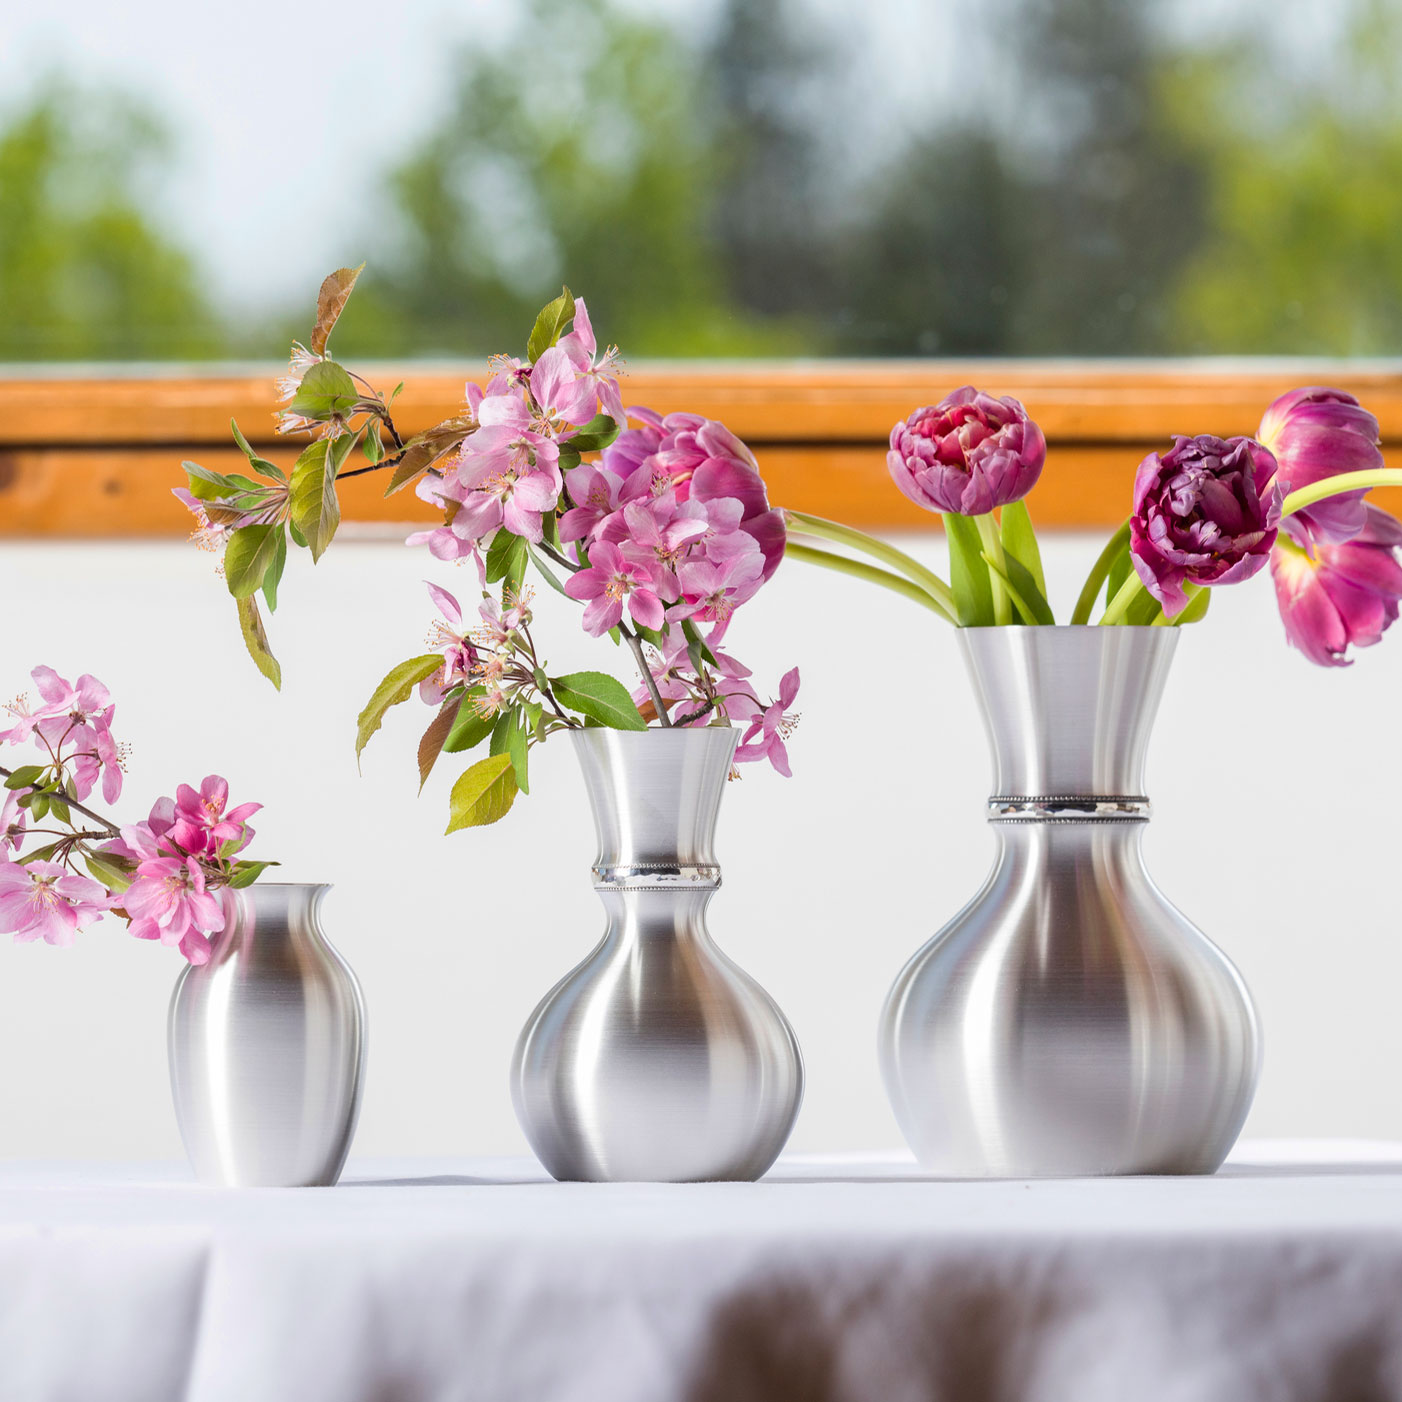 Pewter vases in multiple sizes and shapes with pink flowers